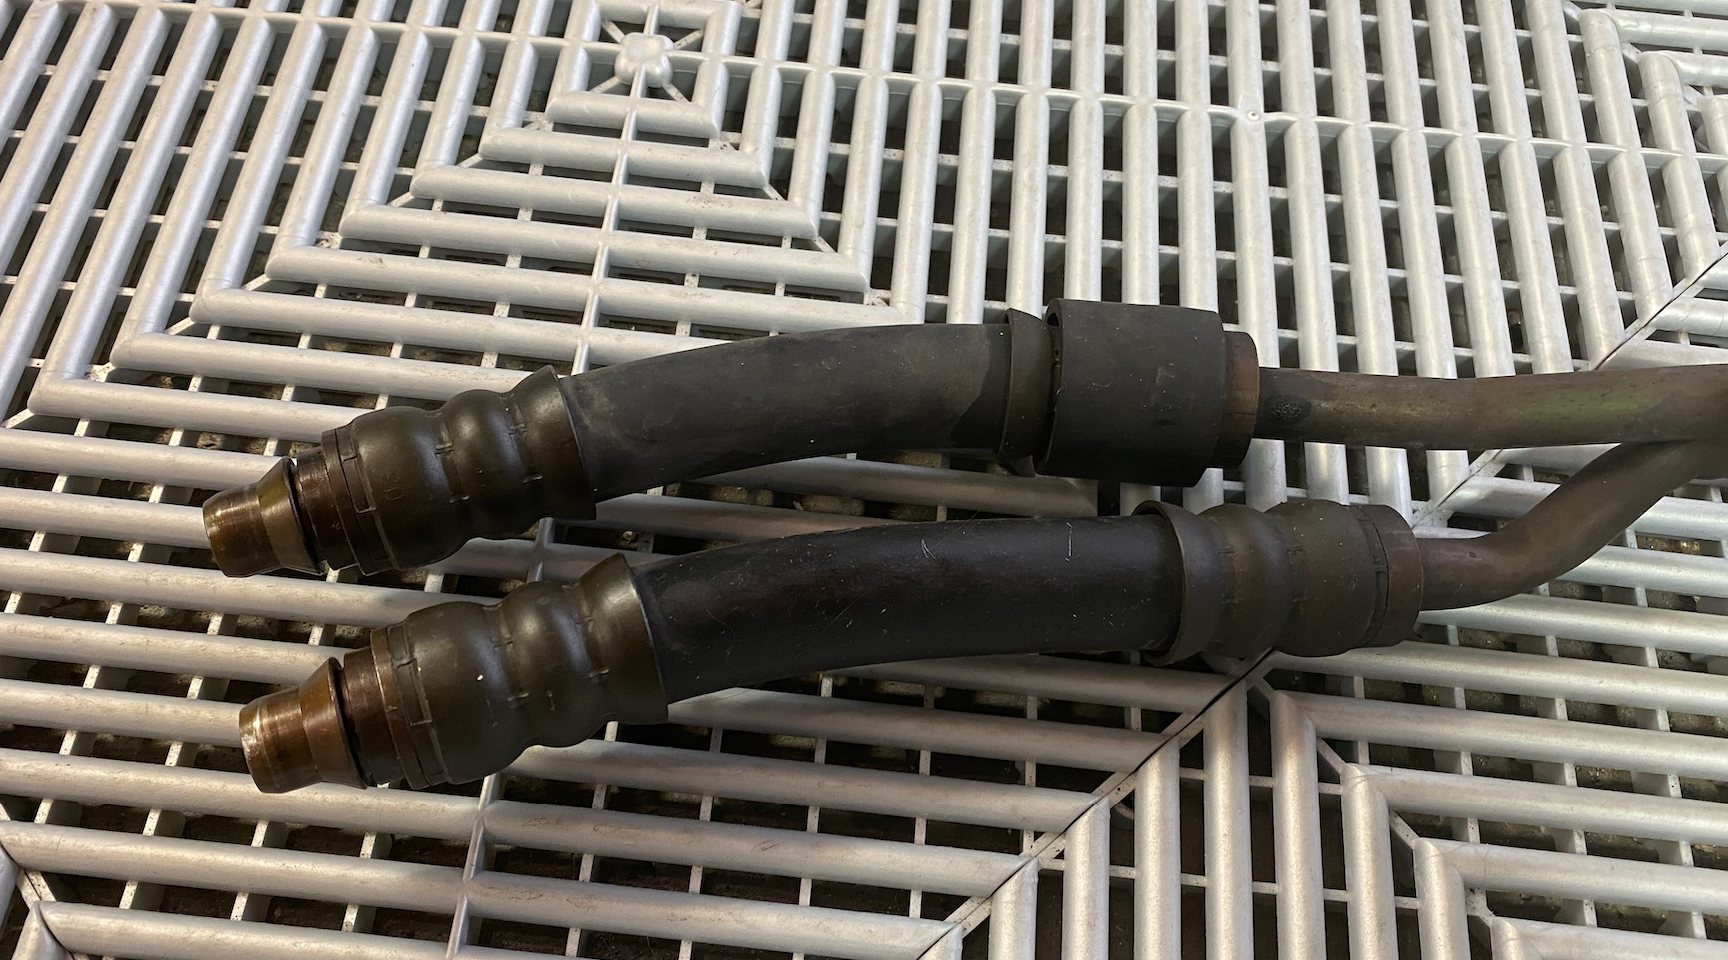 Miscellaneous - FD3S OEM R1/R2 Dual Oil Cooler Hose 14-830B-N3A3 - Used - 1993 to 1995 Mazda RX-7 - Half Moon Bay, CA 94019, United States